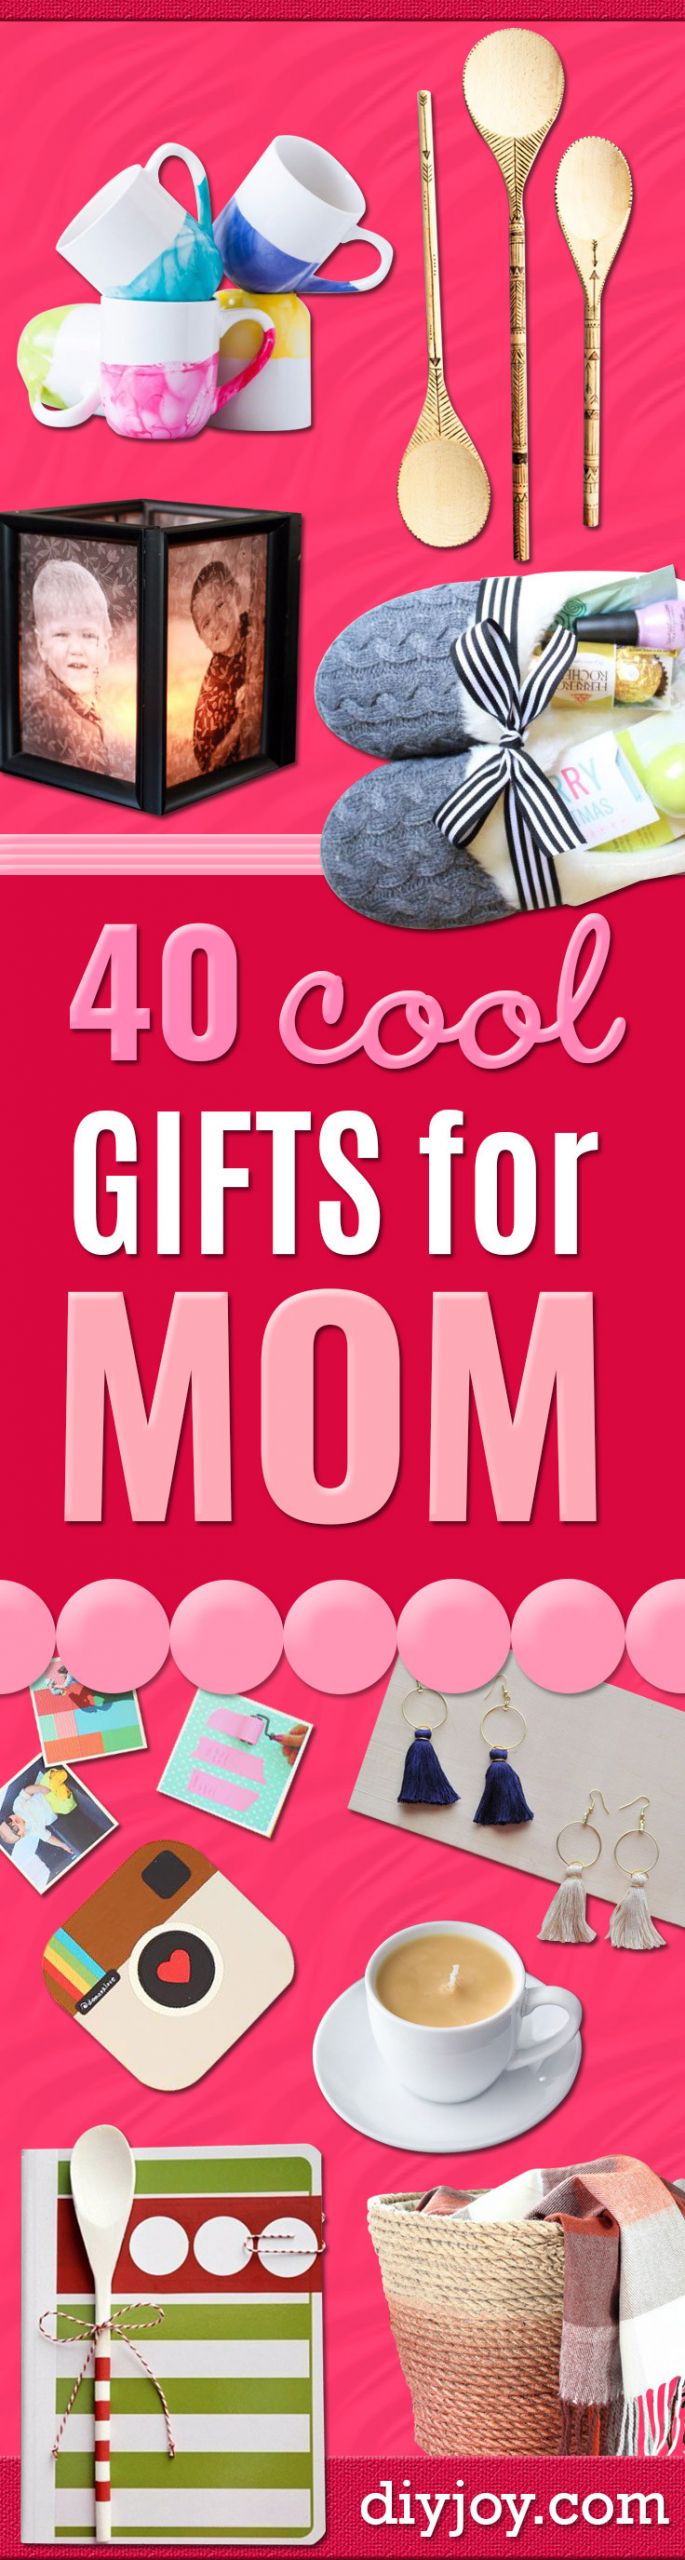 Great Christmas Gift Ideas For Moms
 40 Coolest Gifts To Make for Mom